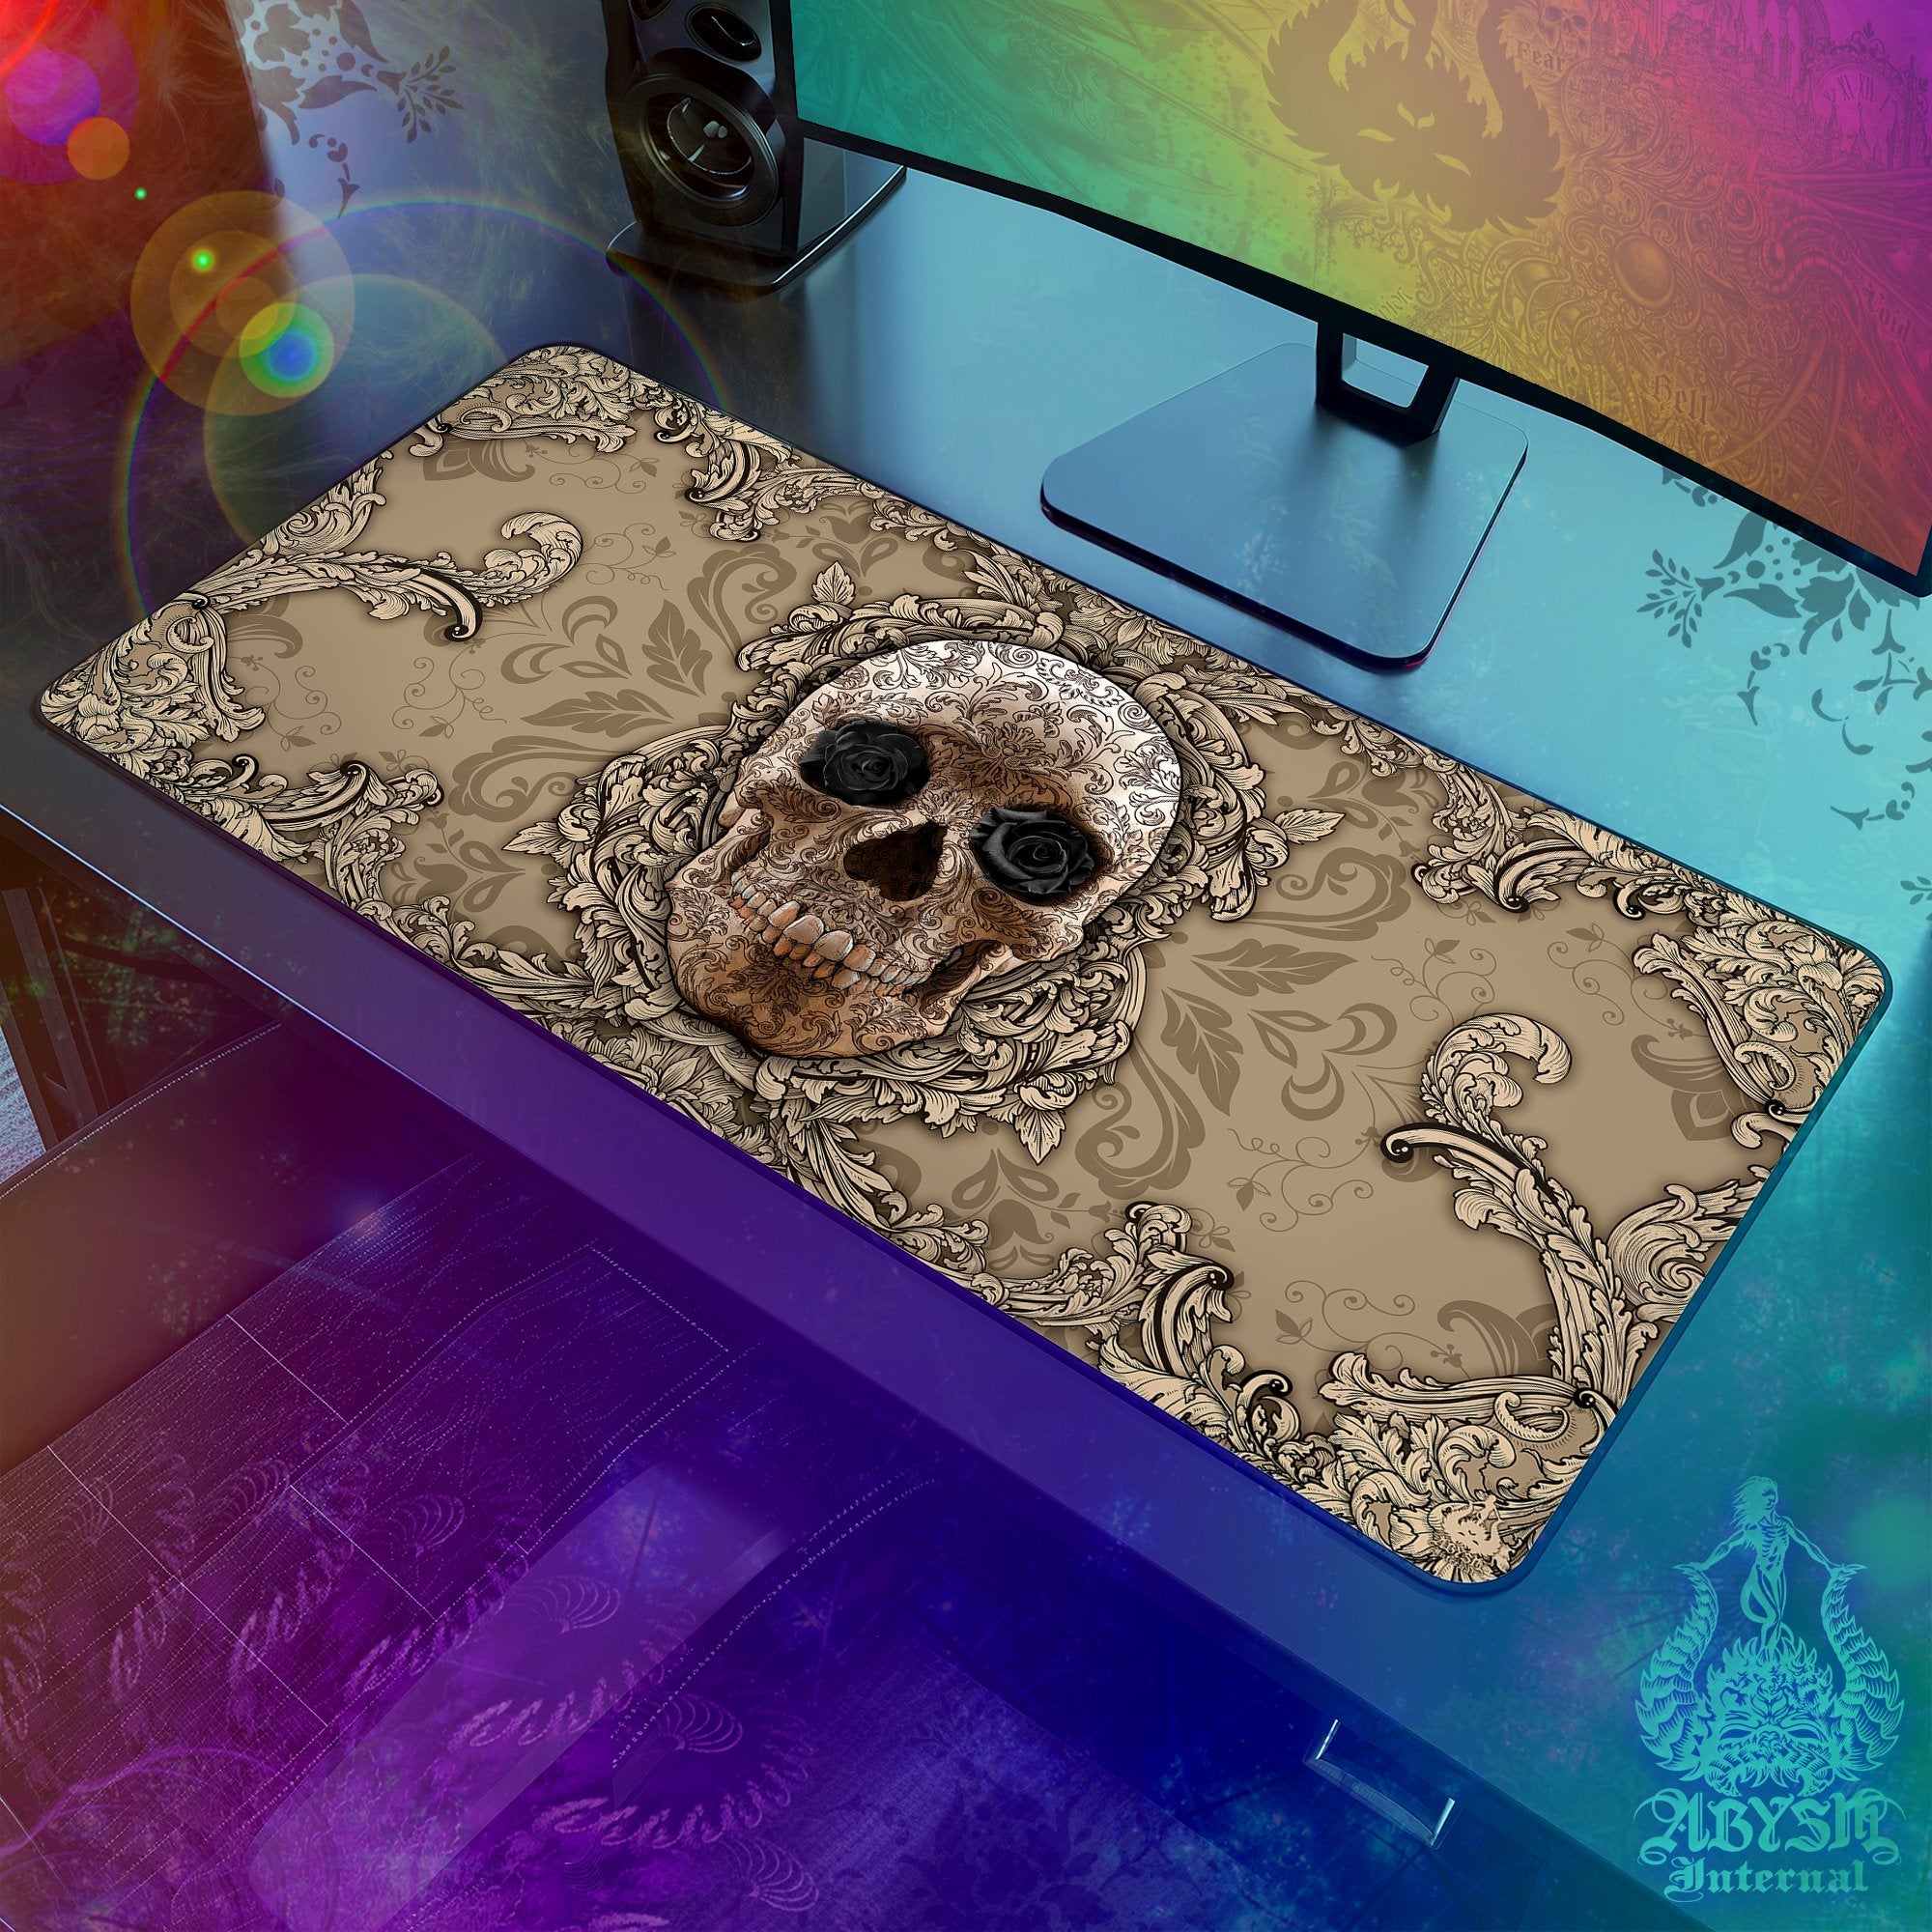 Skull Gaming Mouse Pad, Cream Desk Mat, Baroque Table Protector Cover, Beige Workpad, Art Print - Abysm Internal